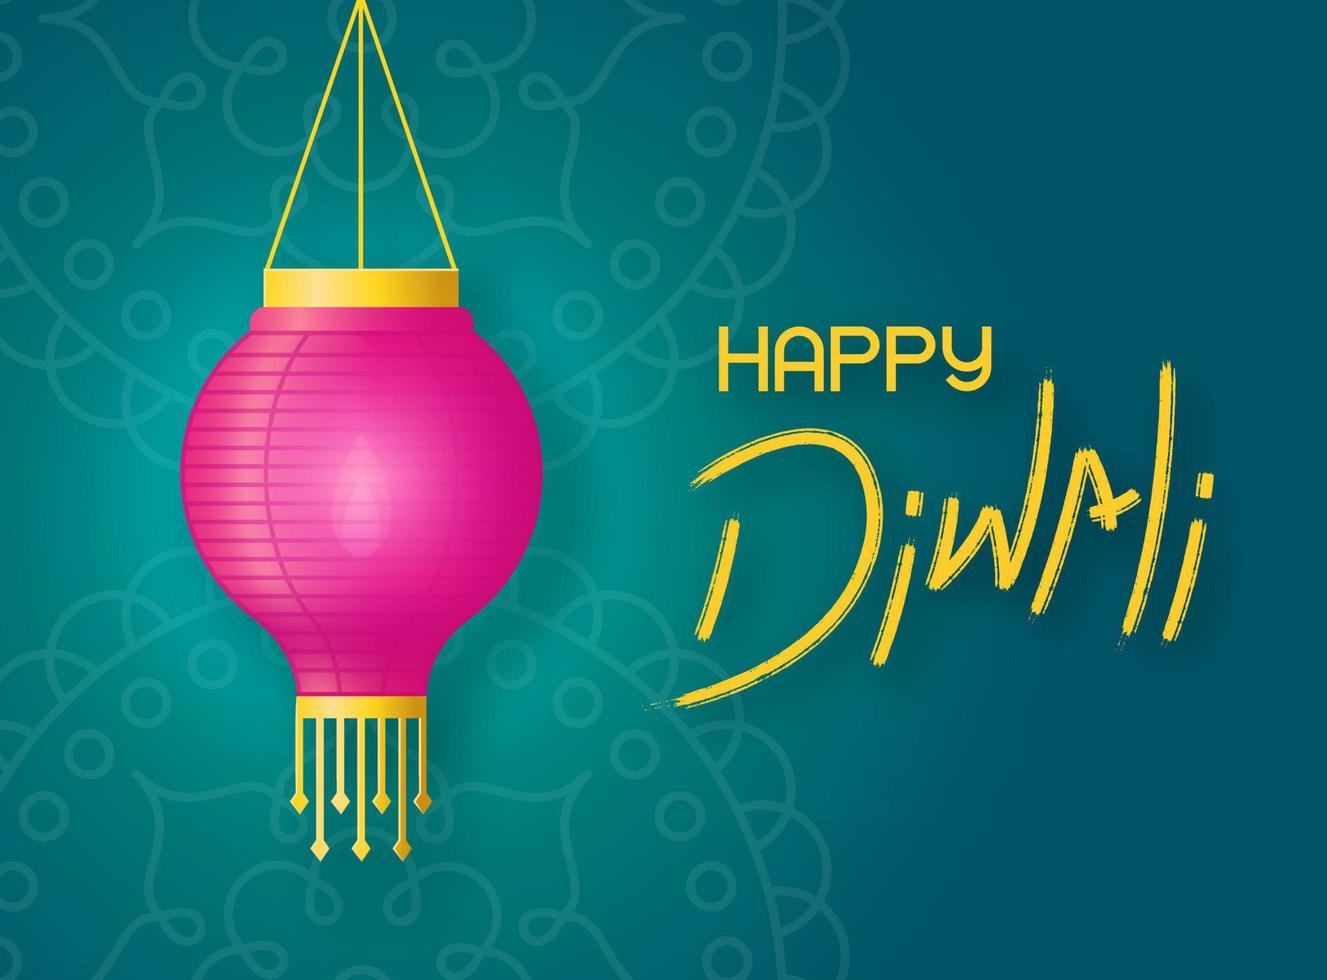 Paper lantern with fire hangs on the background green rangoli. Concept banner happy diwali with lettering and holiday lantern vector